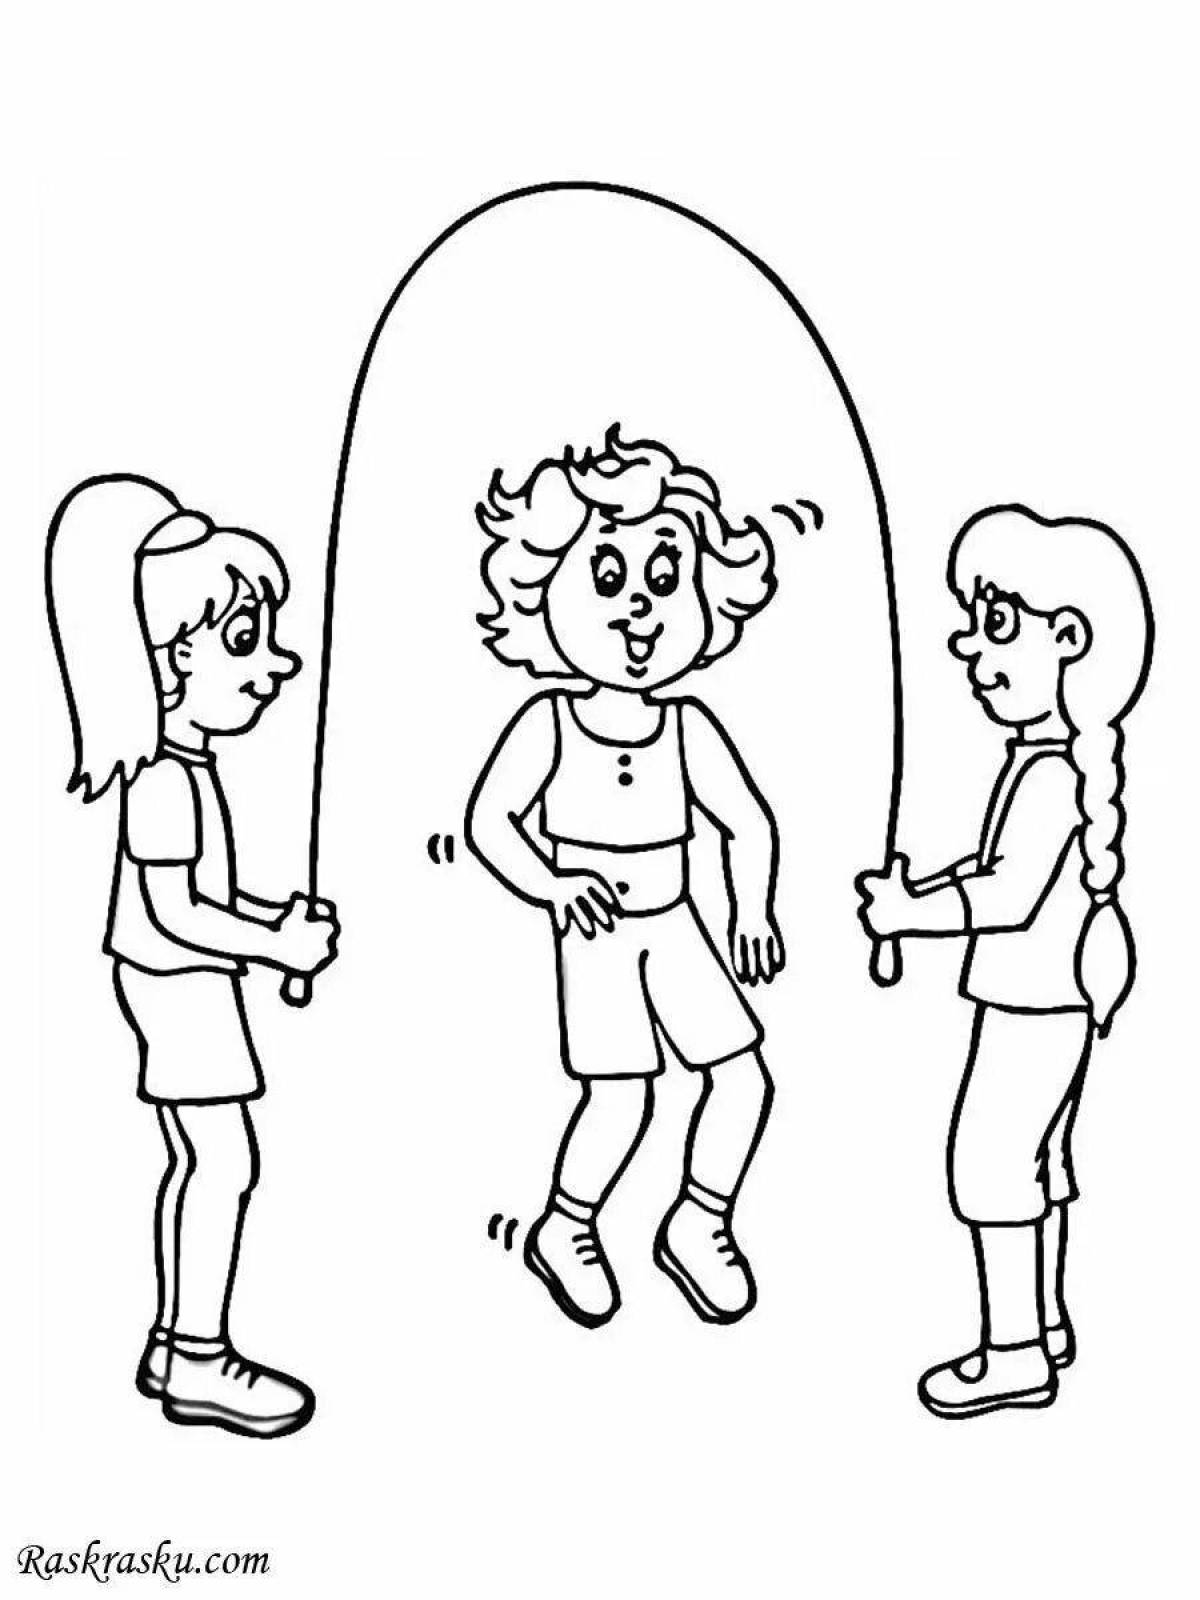 Inspirational classic coloring pages